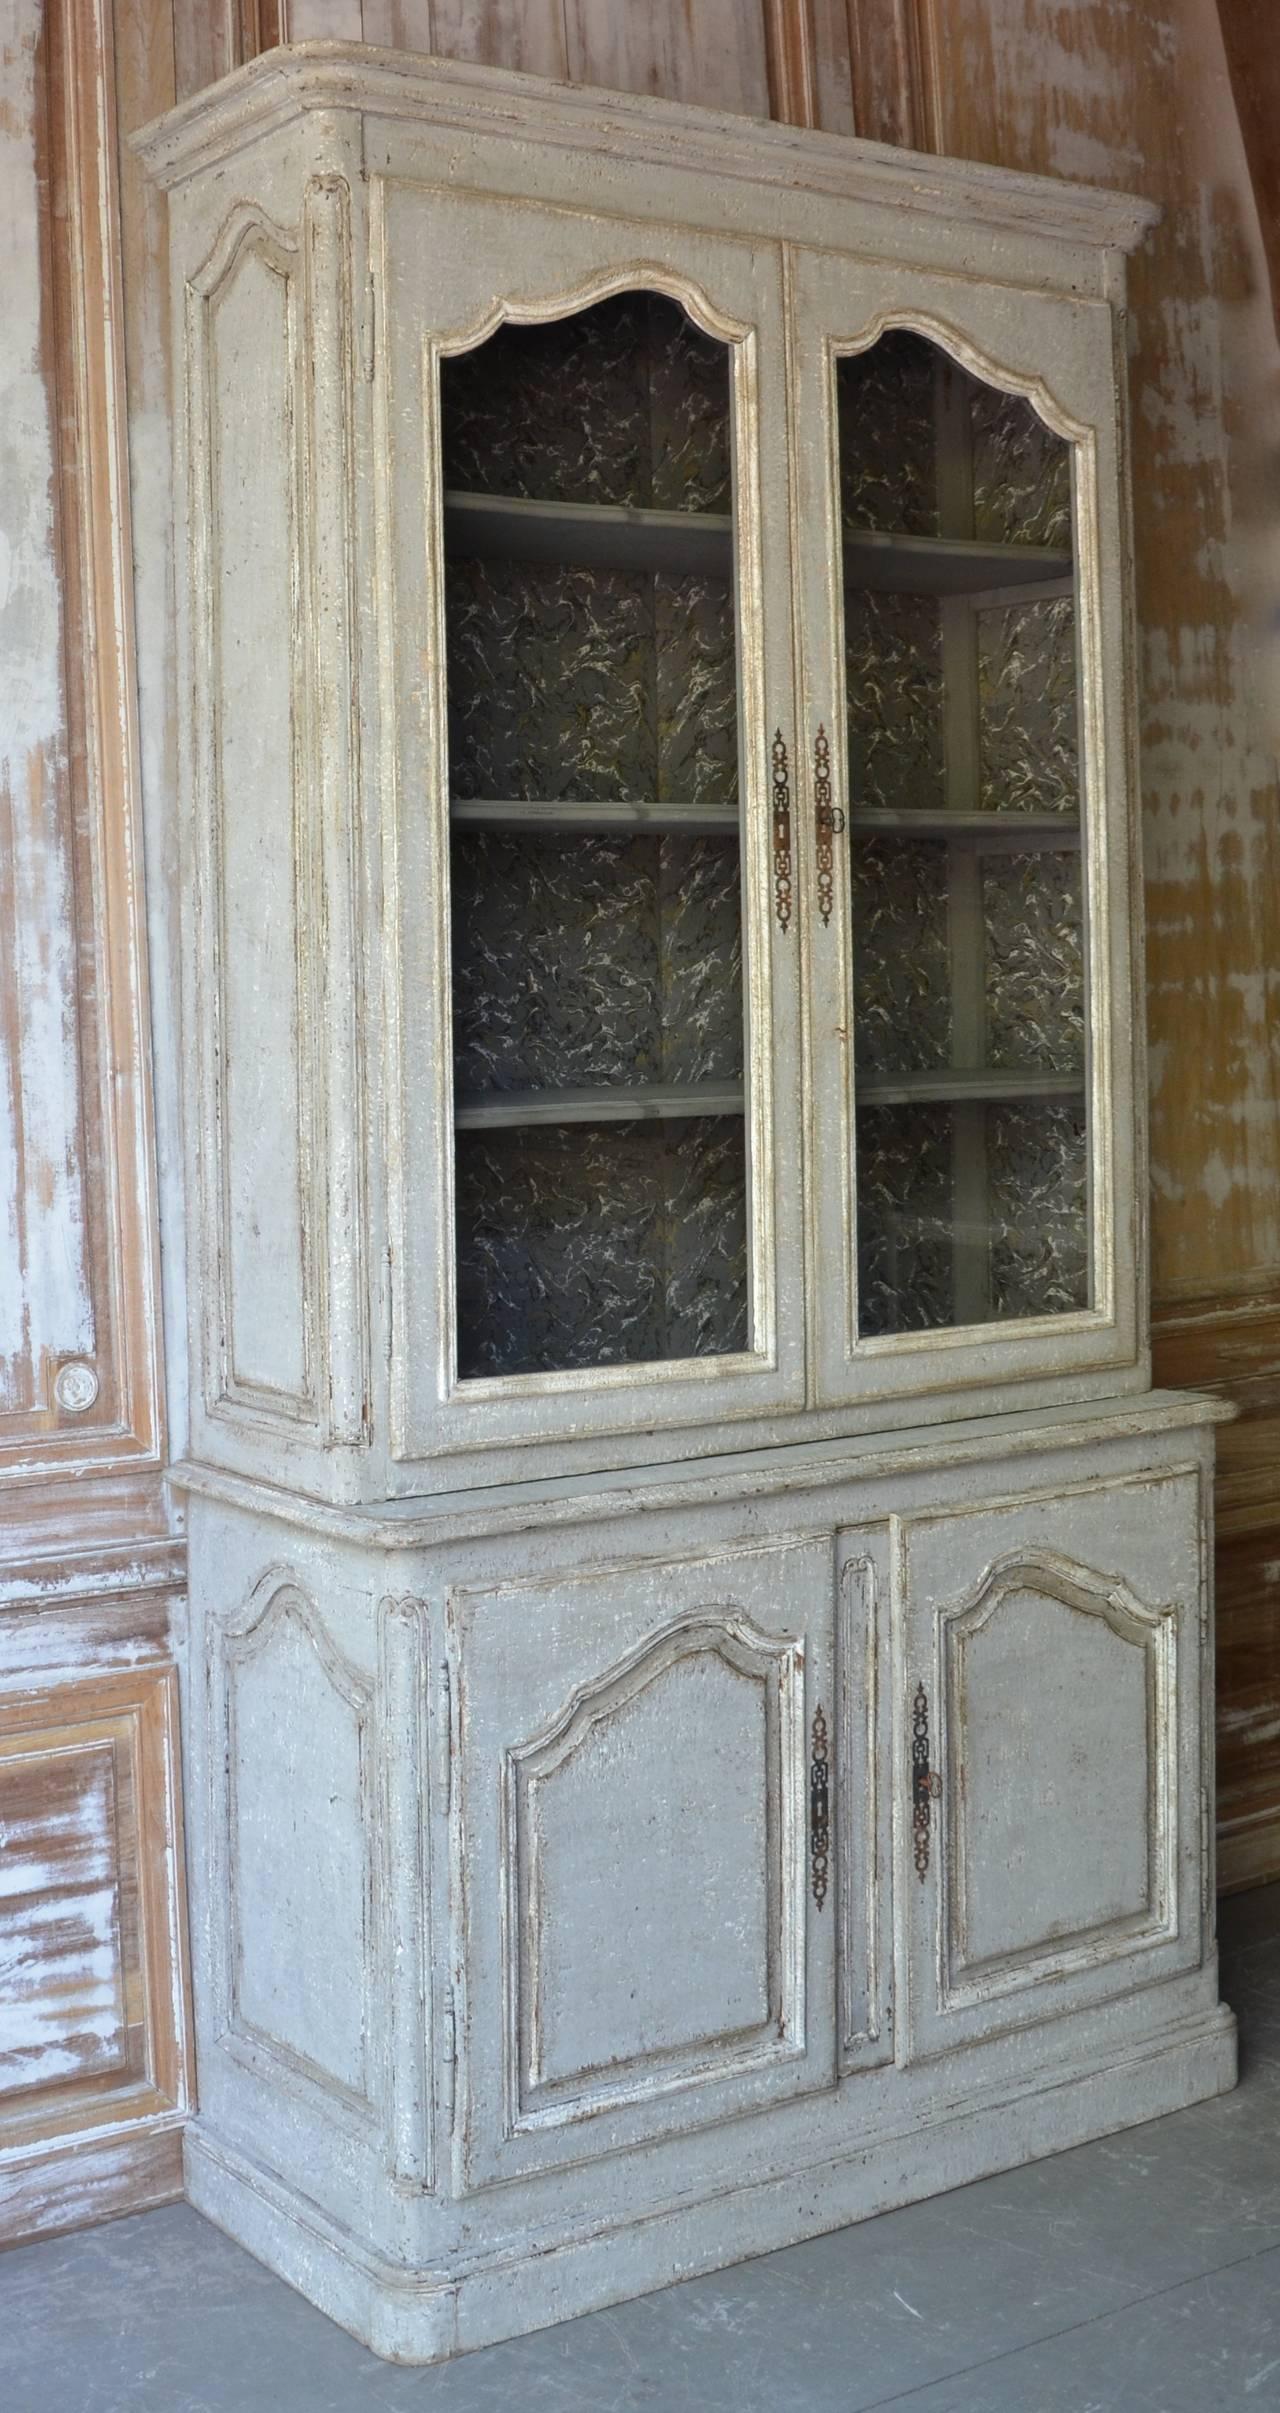 A stunning pair of Gustavian LV style bookcases from Sweden in a light-grey patina finish. The book cabinets have glazed top panels, a base with fielded panel doors and paneled sides. Inside is decorated with lovely papered walls and three